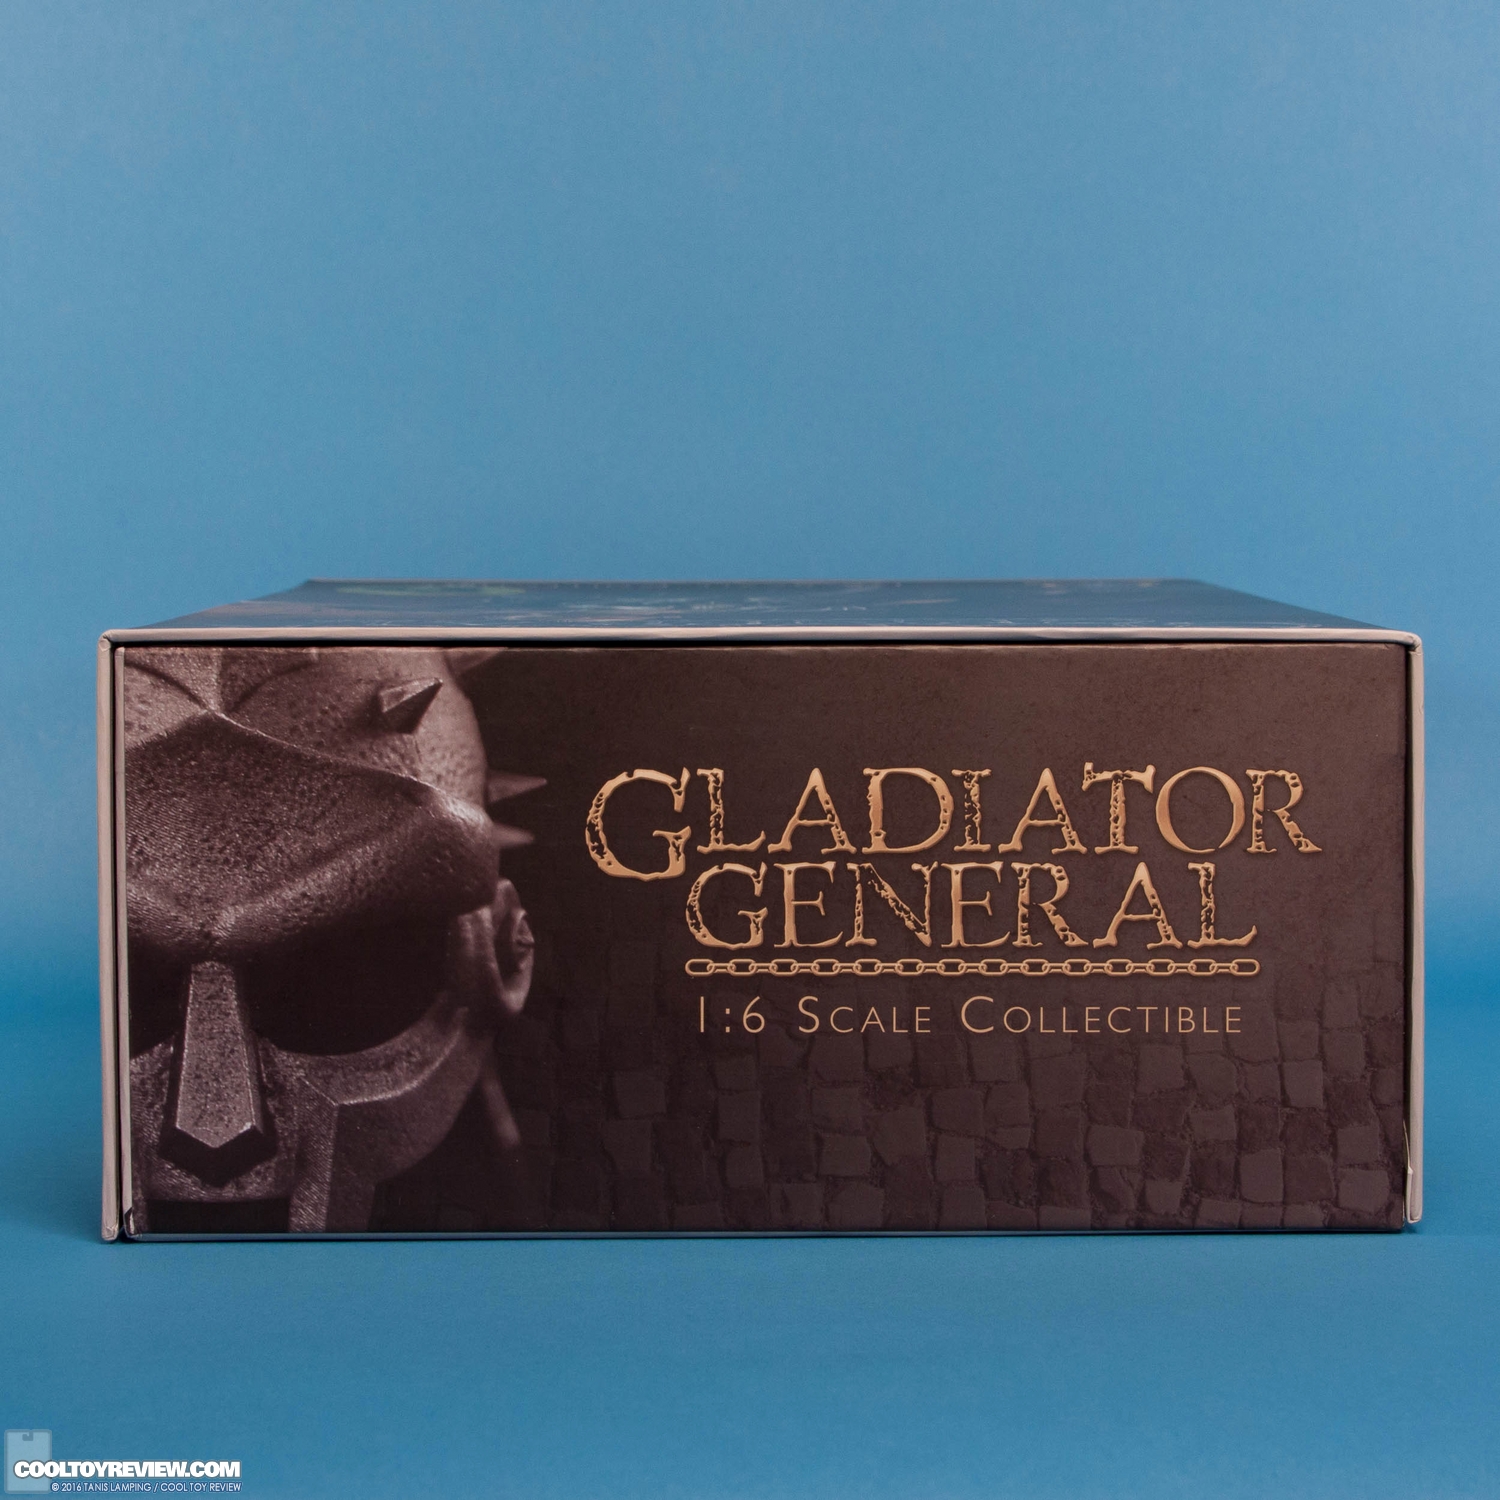 pangaea-toy-gladiator-general-sixth-scale-collectible-figure-073.jpg